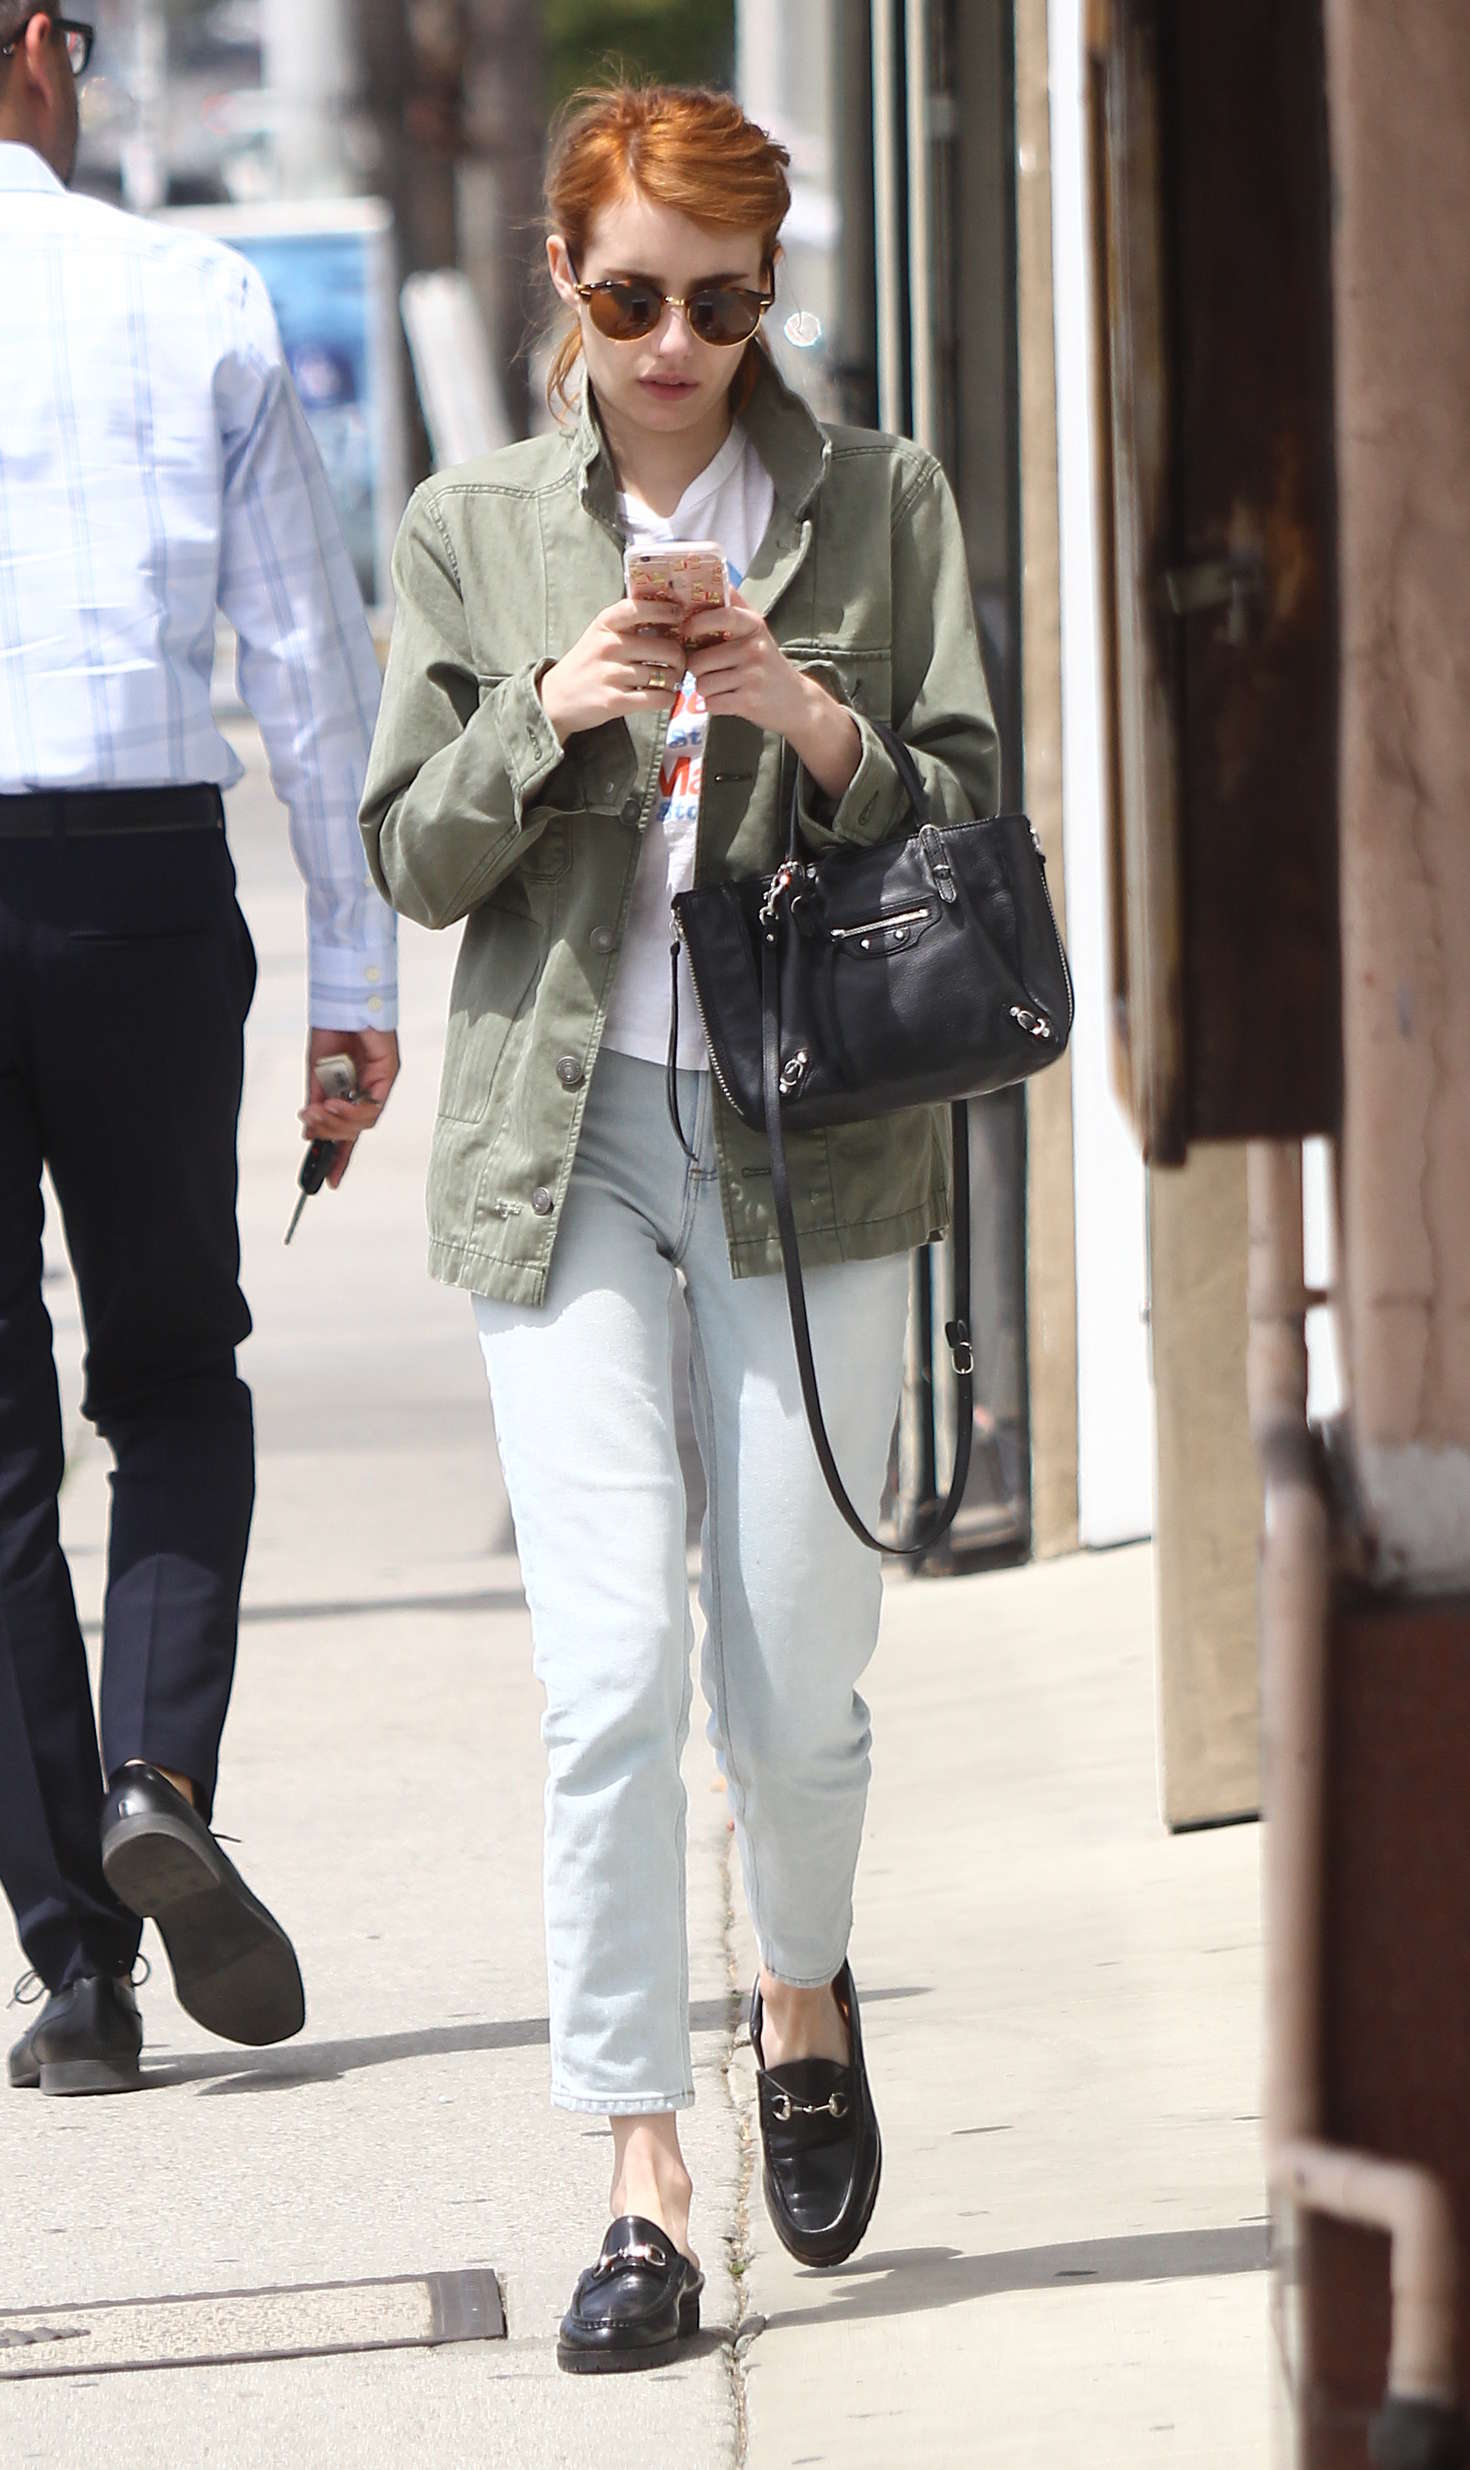 Emma Roberts in White Jeans -01 | GotCeleb